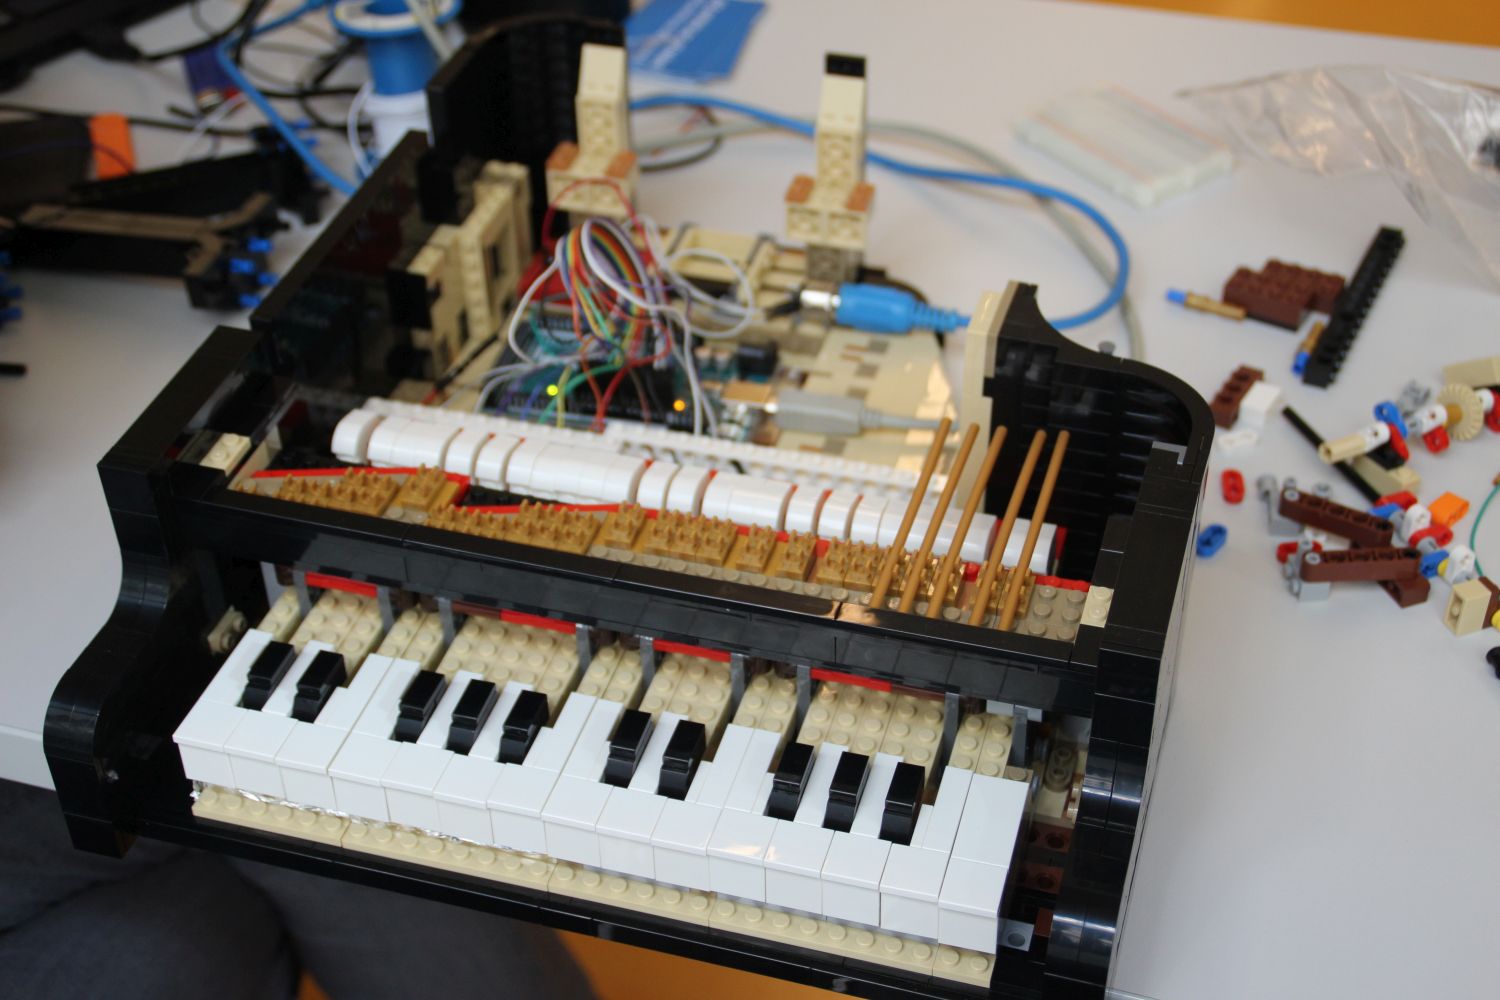 The Playel, which is a real playable Lego MIDI Grand Piano electrified by Oliver Hödl